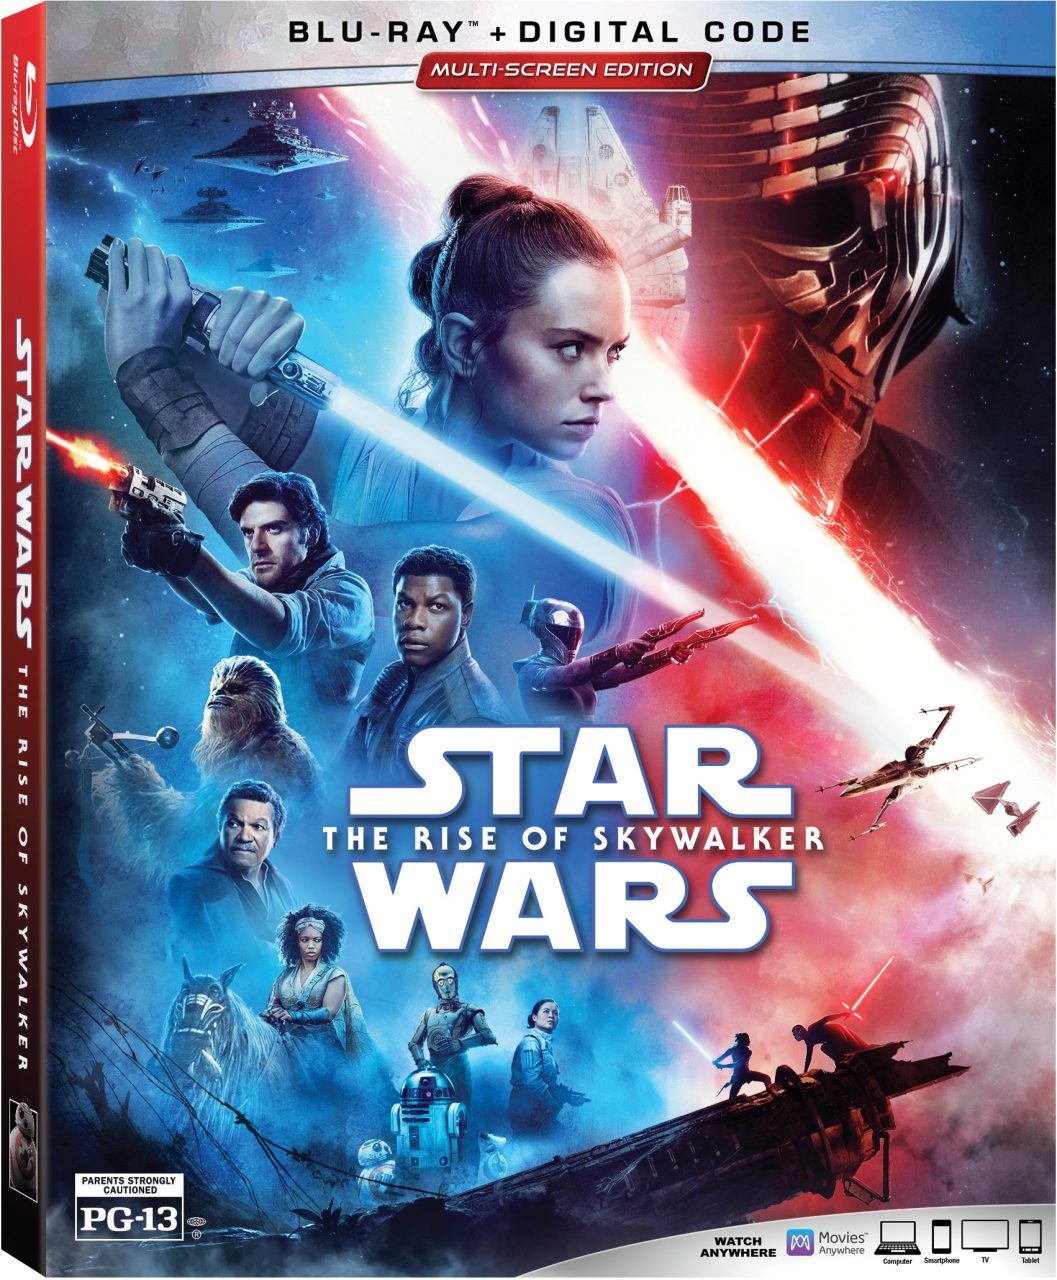 Star Wars: The Rise Of Skywalker Blu-Ray Combo Pack cover (Walt Disney Studios Home Entertainment/Lucasfilm)